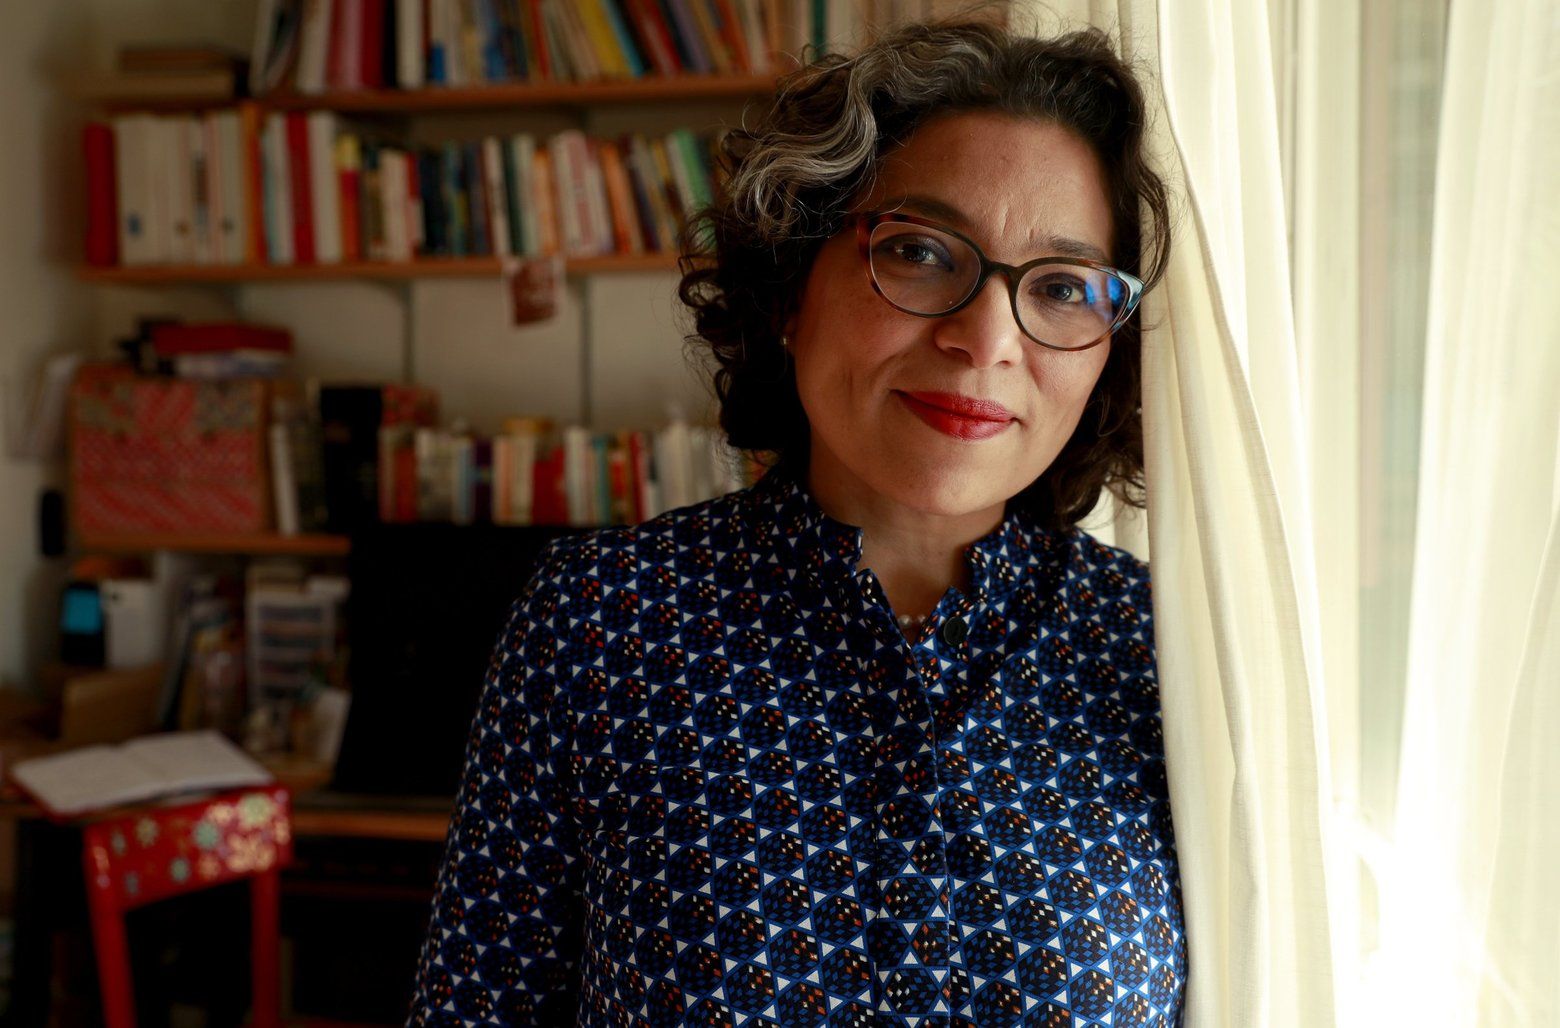 Washington State Poet Laureate Claudia Castro Luna is photographed in her writing space in her home in Seattle. Image by Erika Schultz / The Seattle Times. United States, 2020.